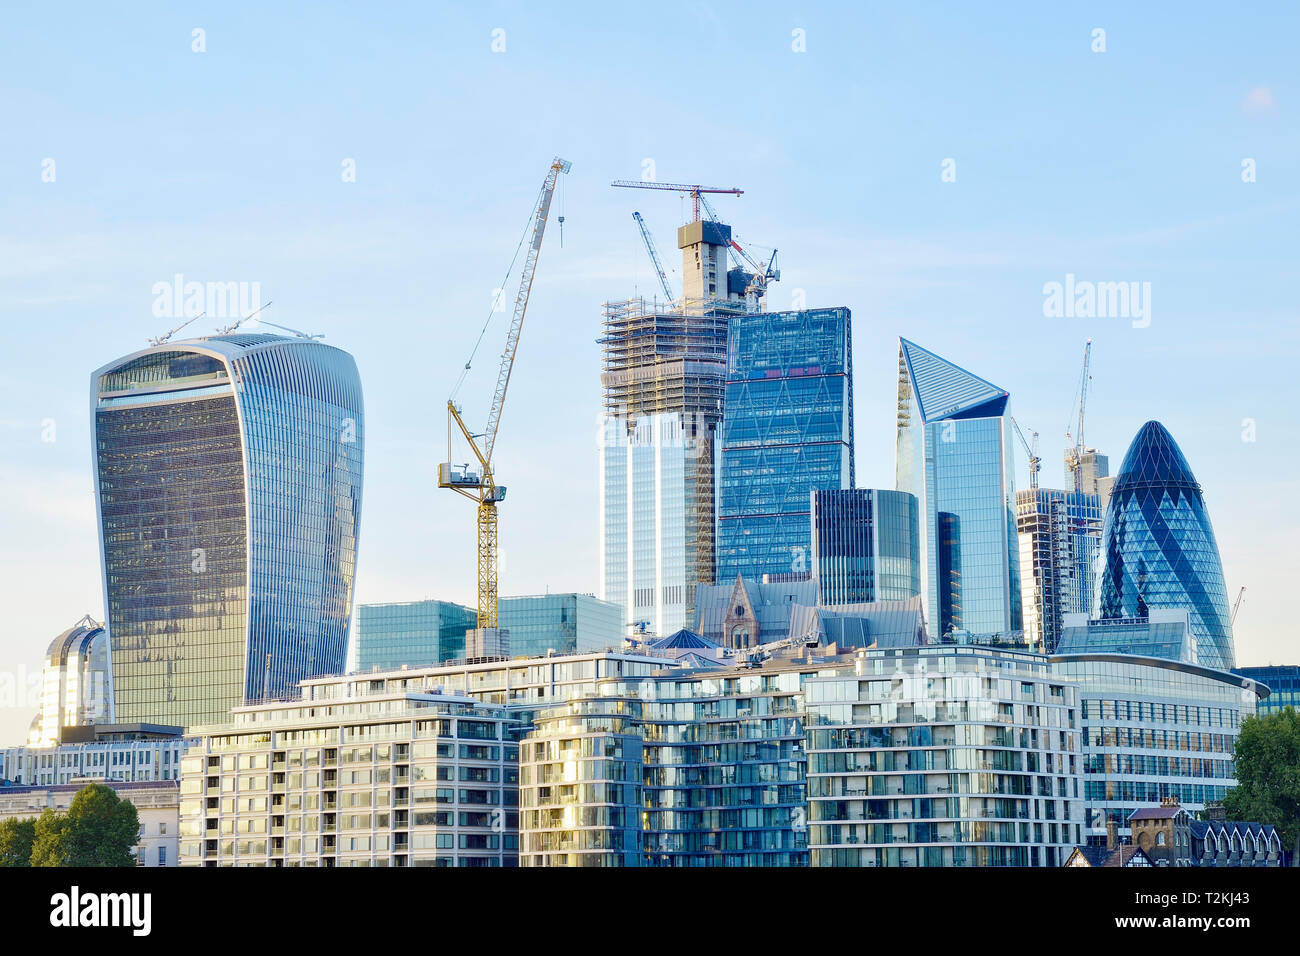 City of London Financial District The Square Mile, United Kingdom Stock Photo